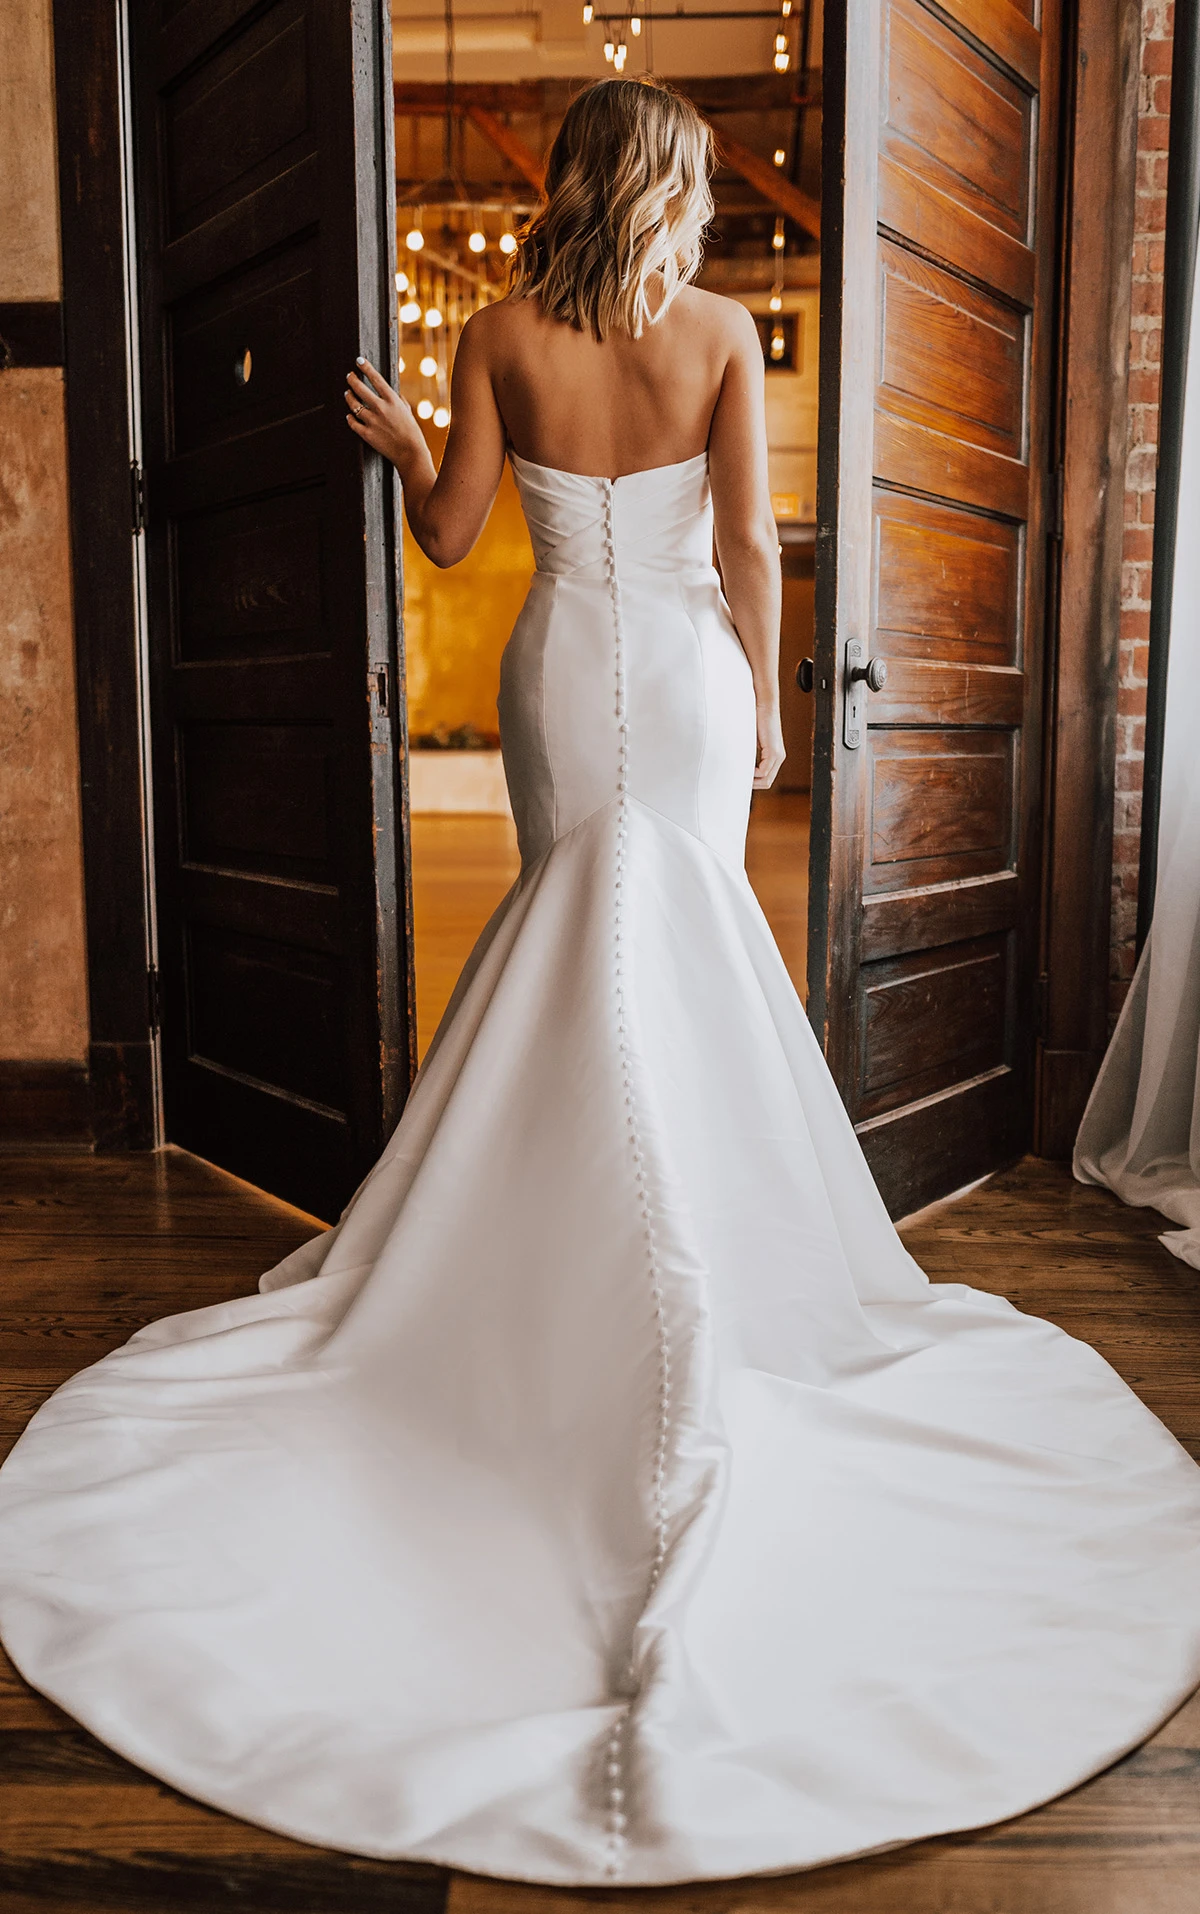 simple mermaid wedding dress with train and sweetheart neckline - D3340 by Essense of Australia